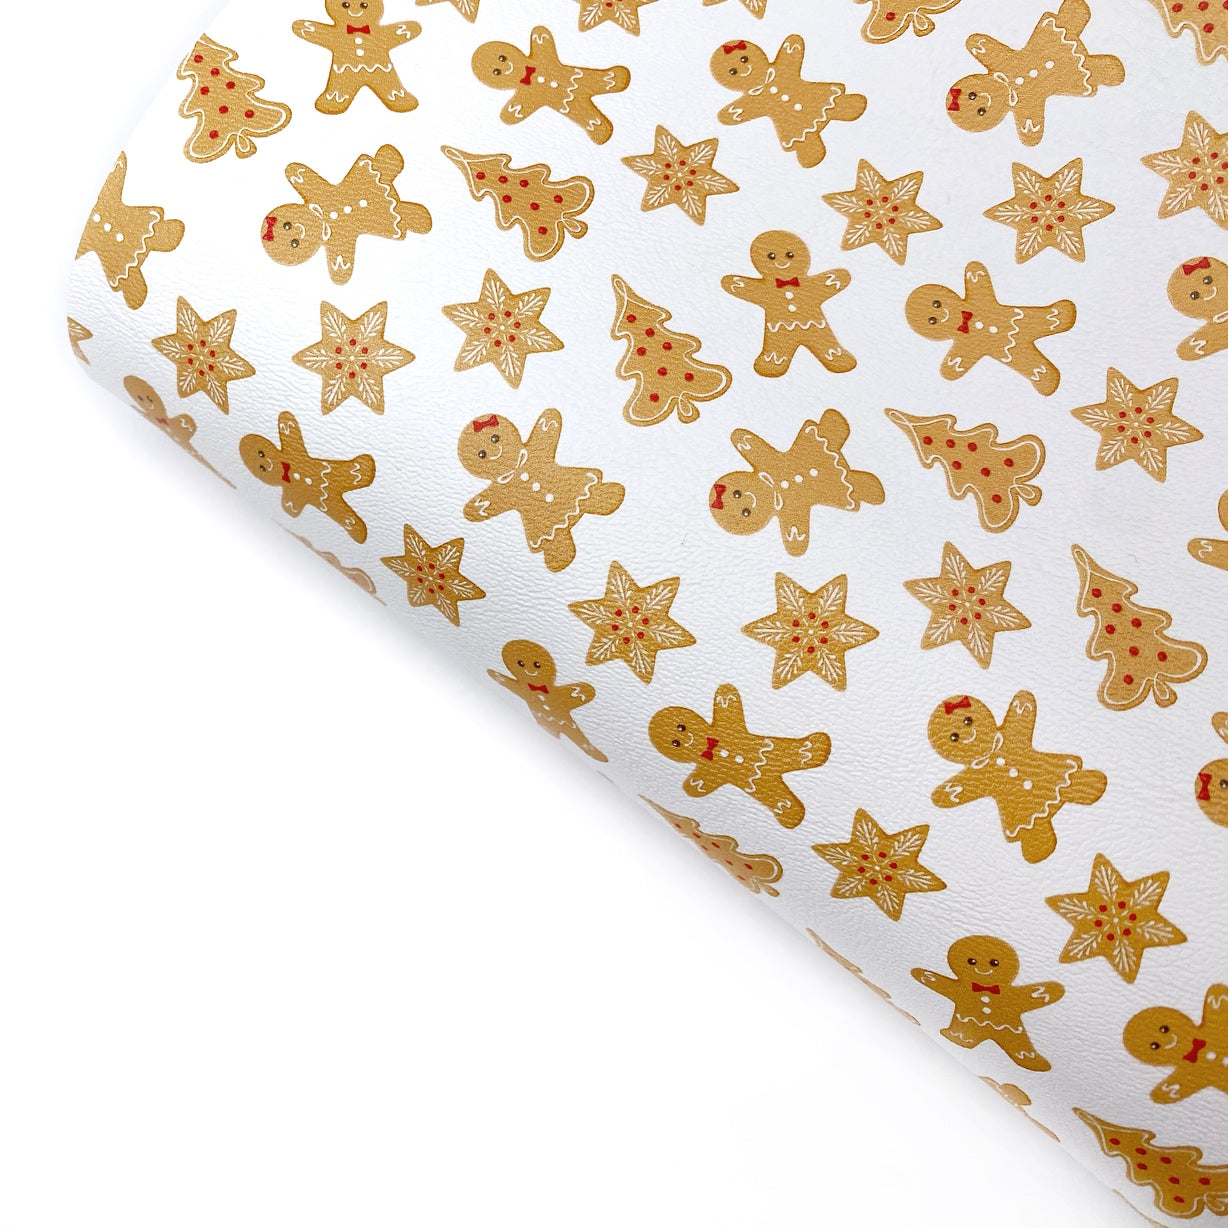 Gingerbread Cookies Premium Faux Leather Fabric Sheets